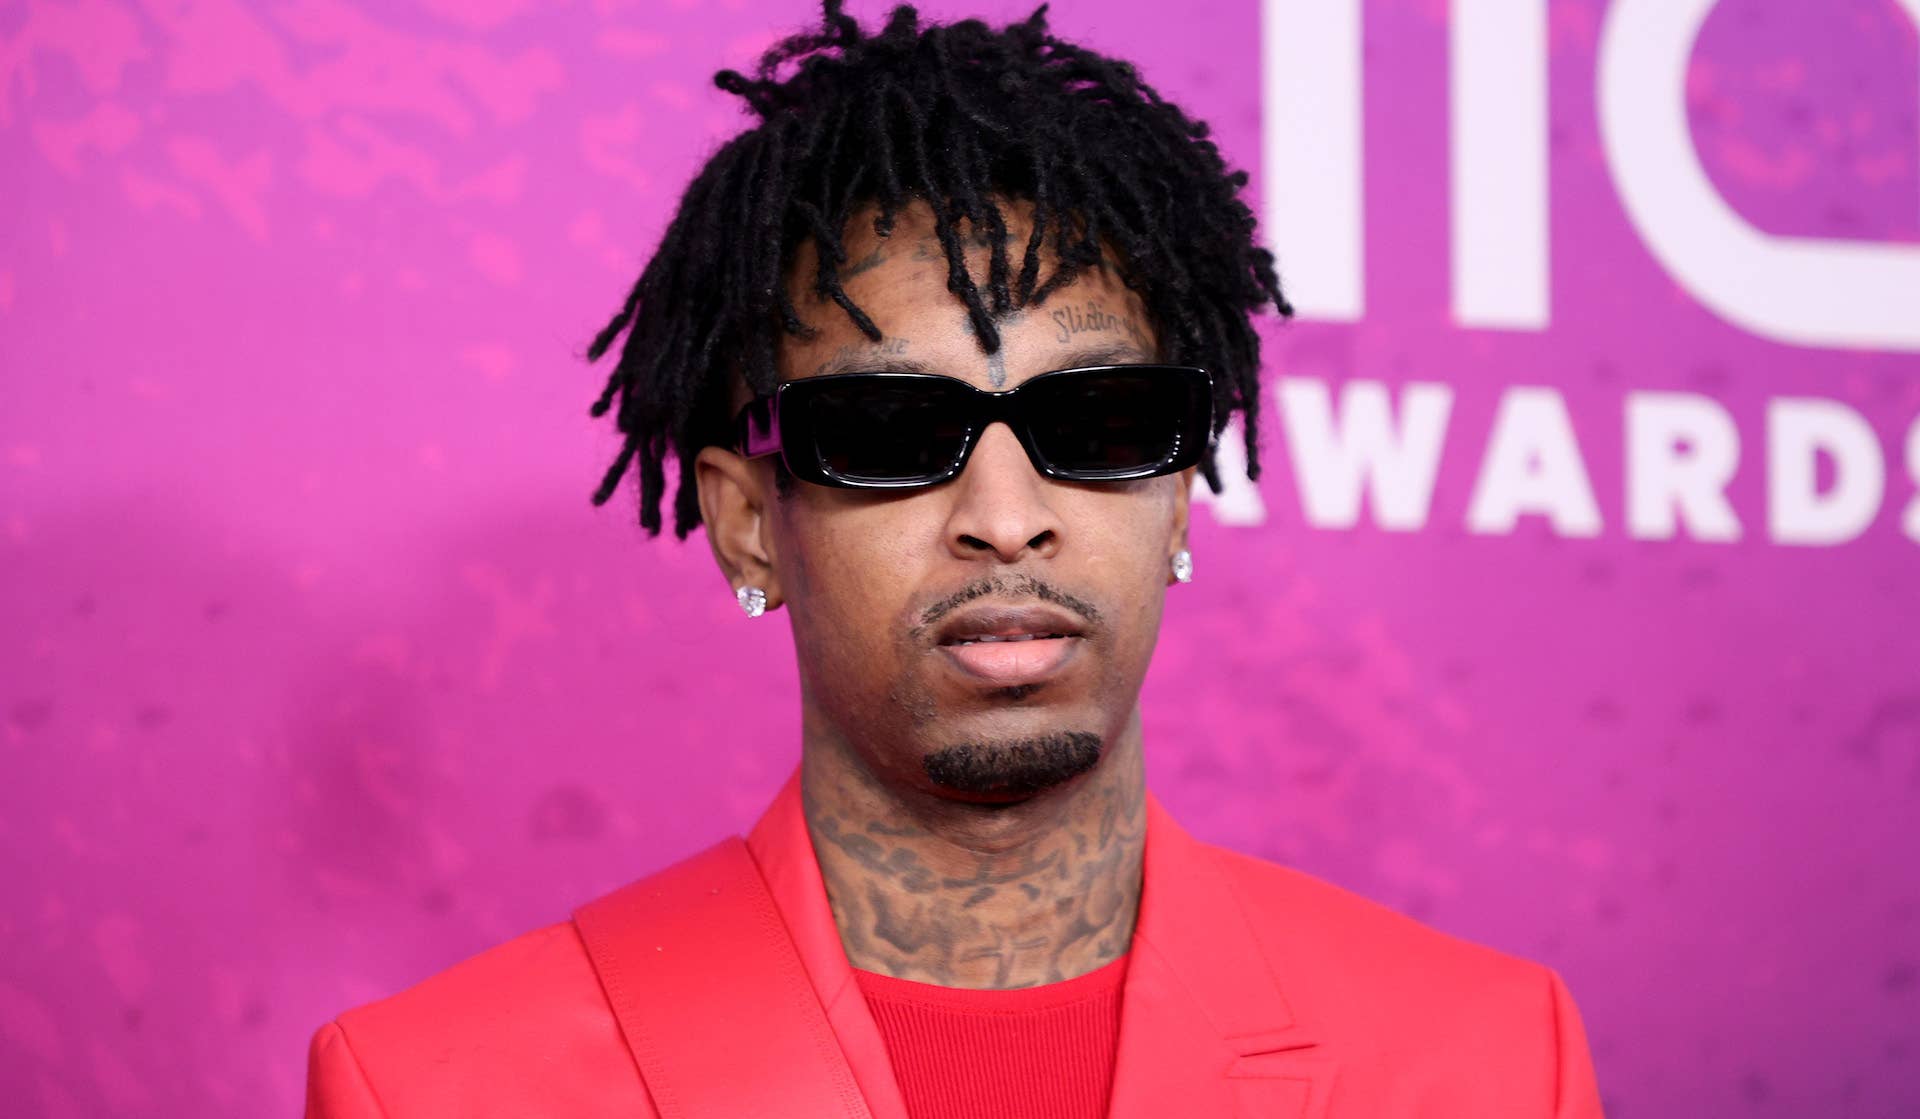 21 Savage attends 2021 Soul Train Awards